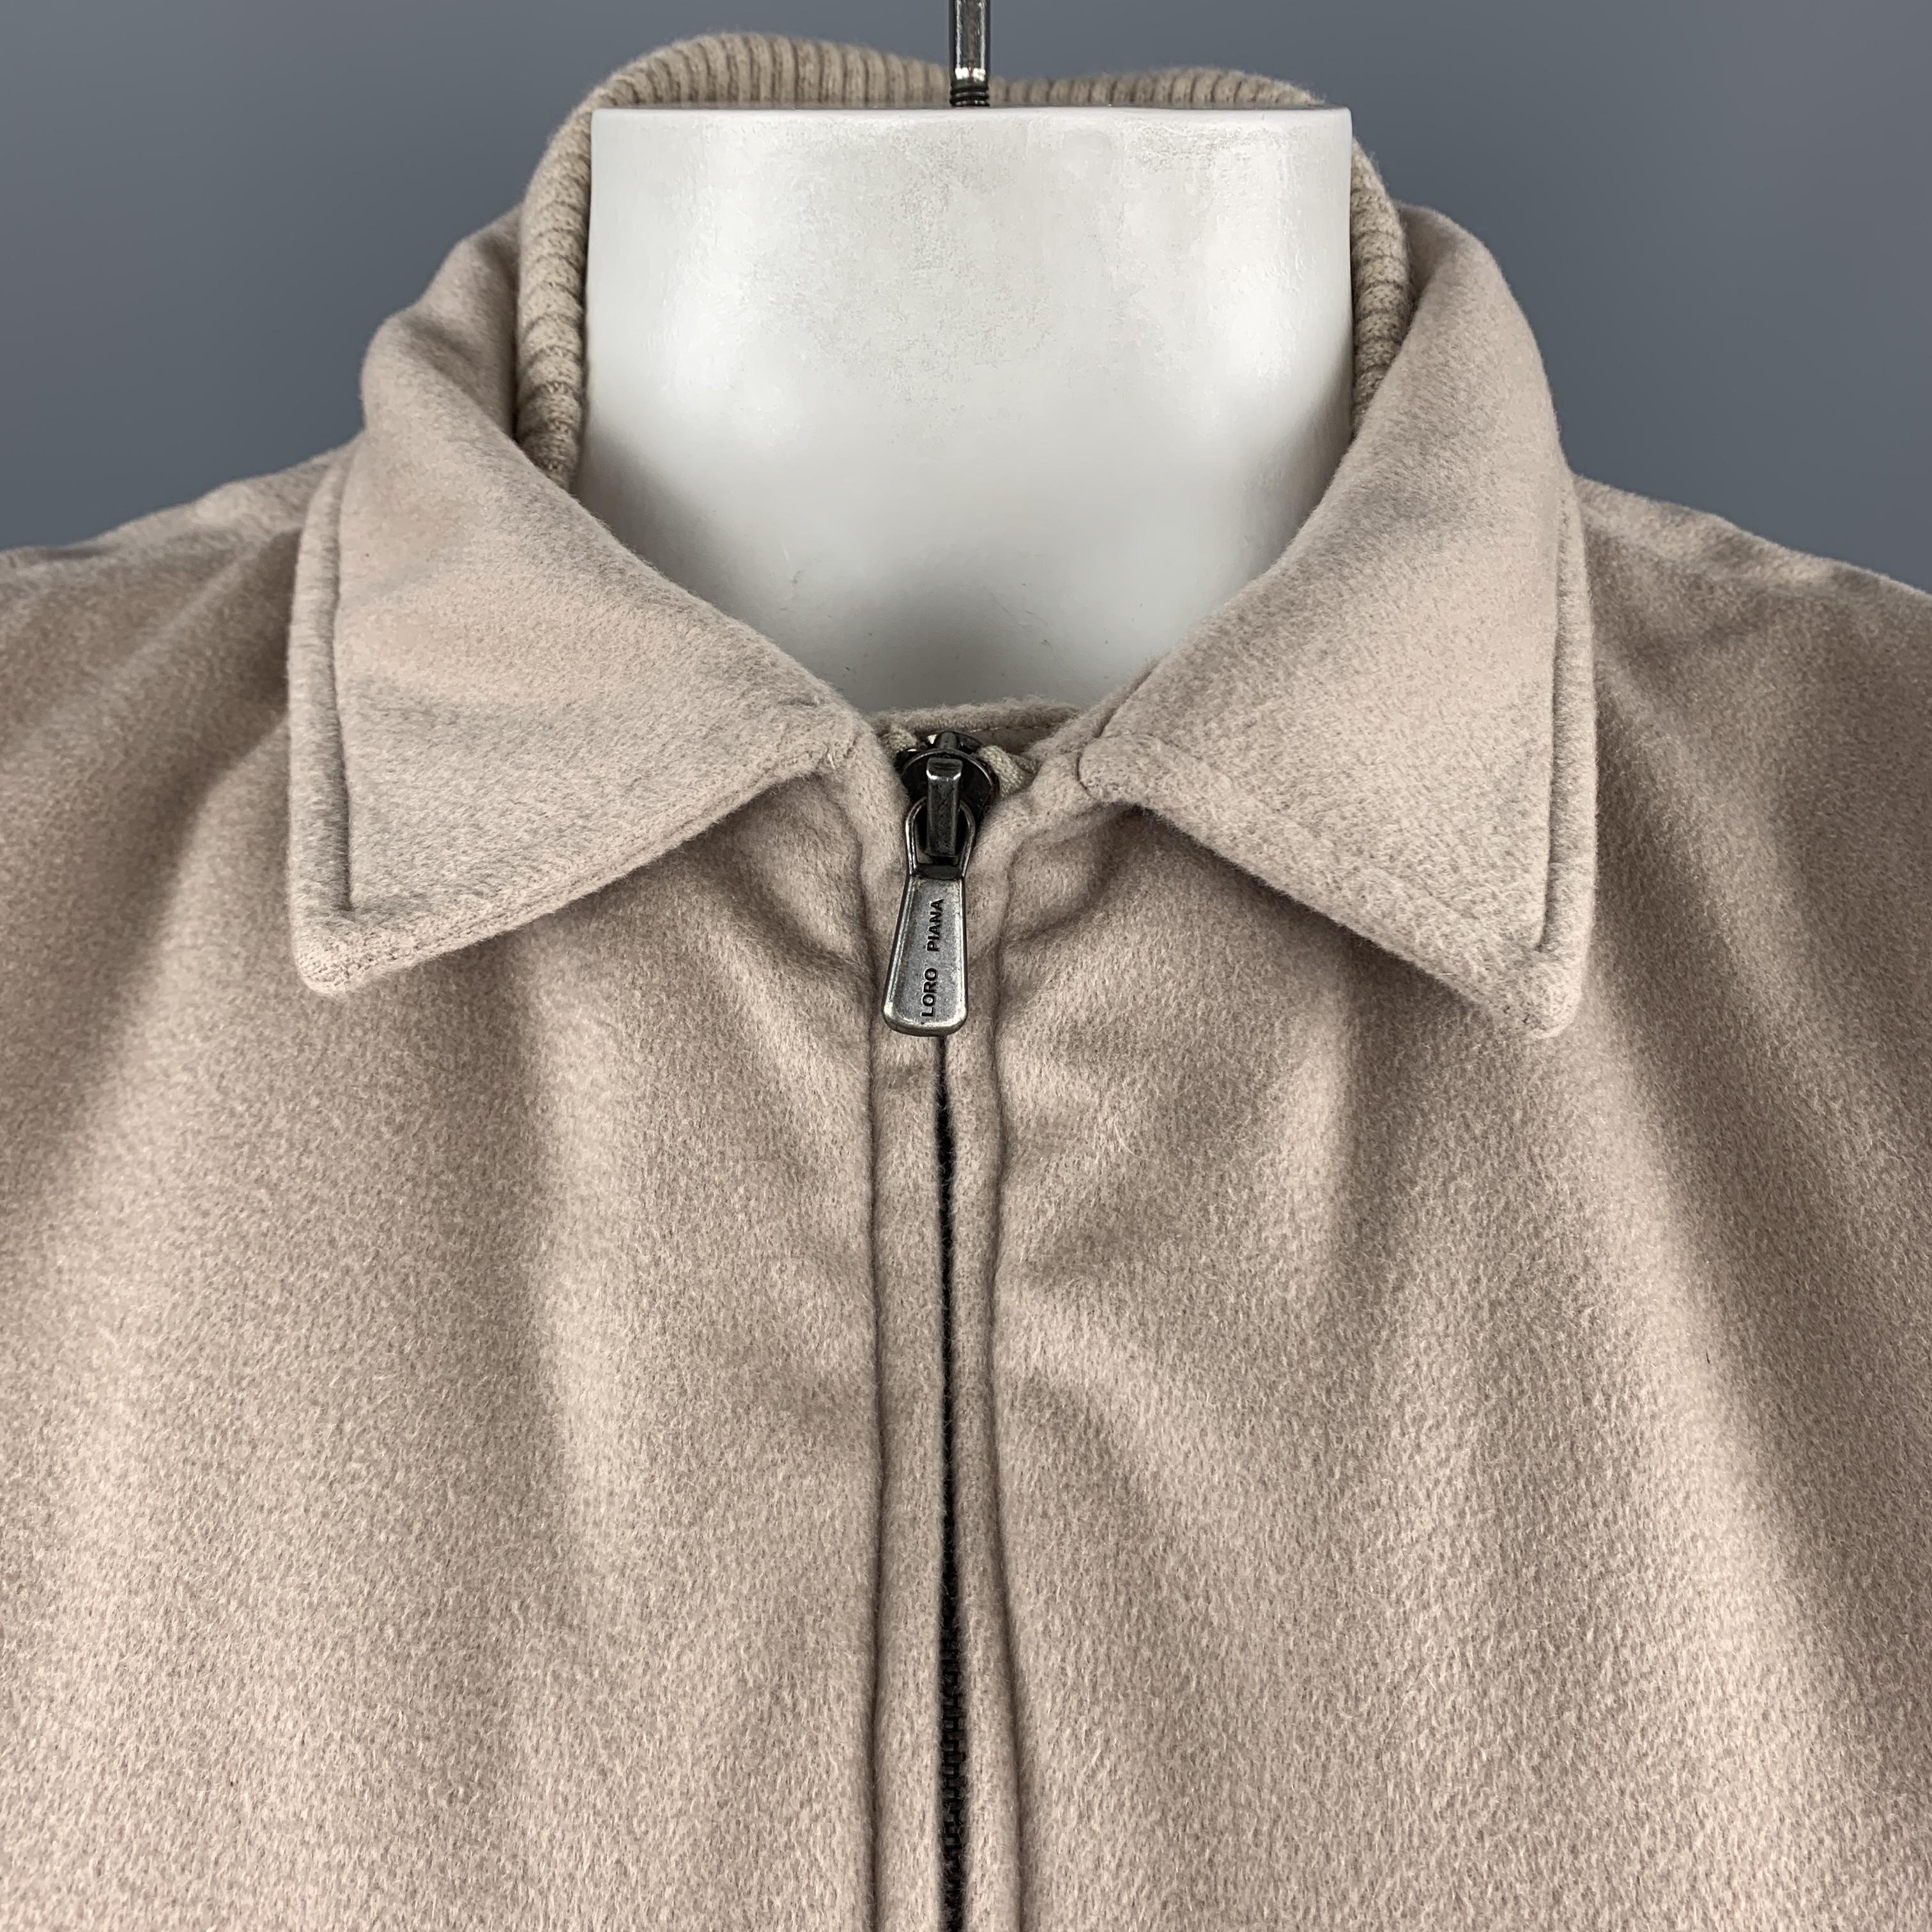 LORO PIANA Storm System vest comes in oatmeal beige cashmere with a high brown suede trimmed collar, double zip front, zip pockets, and ribbed cashmere knit inner collar. Made In Italy. 

Excellent Pre-Owned Condition. Retail price